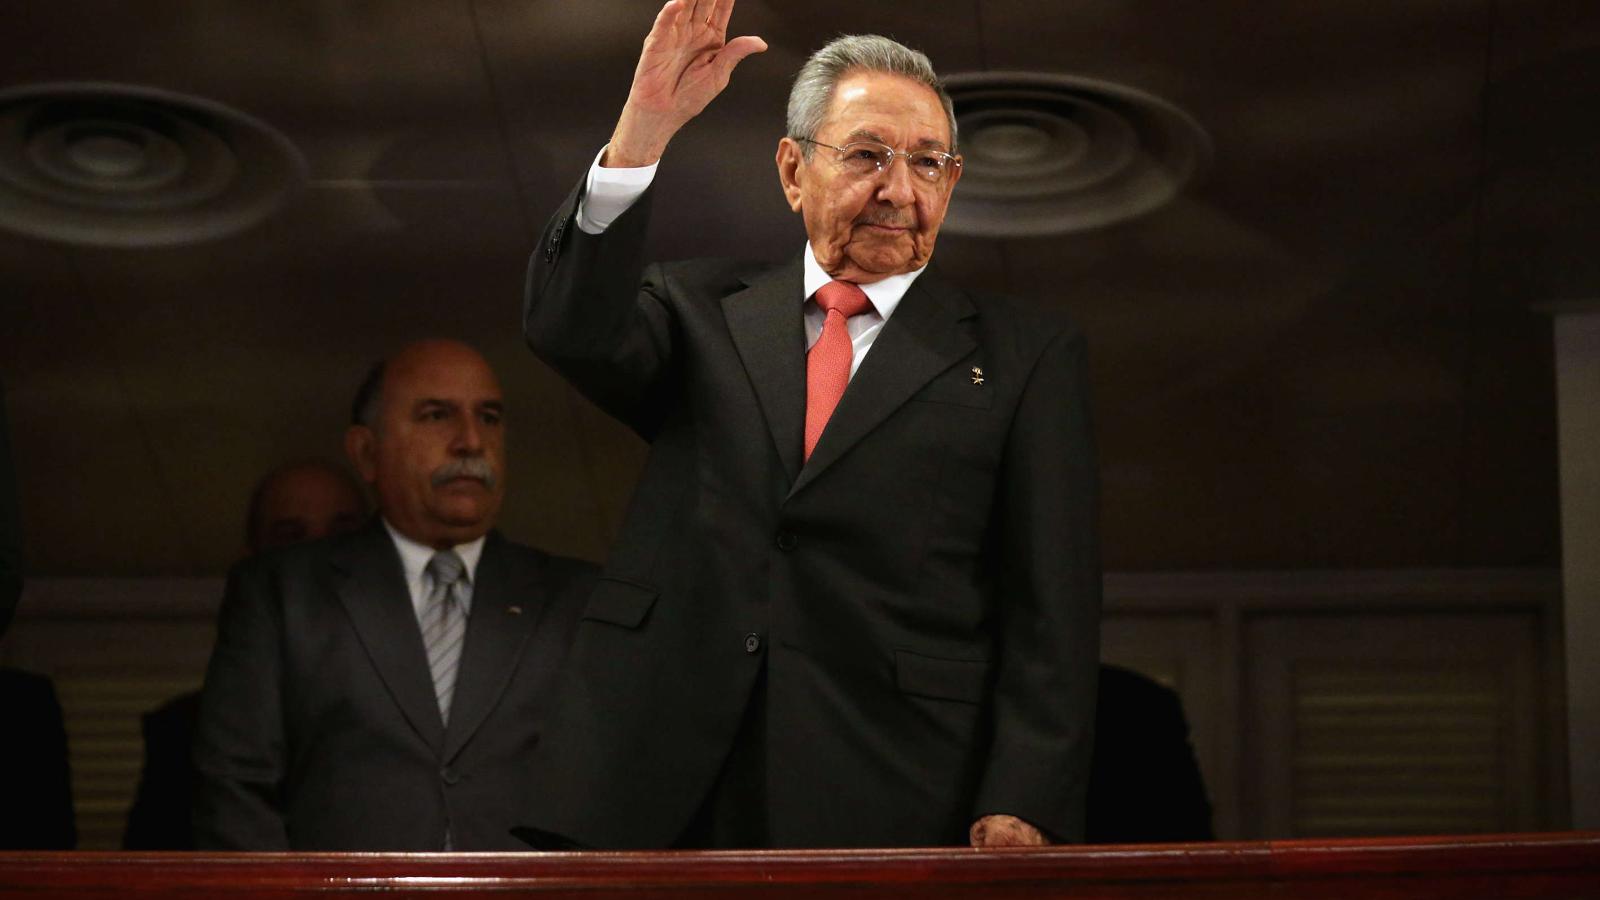 Raul Castro resigned from the leadership of the Communist Party